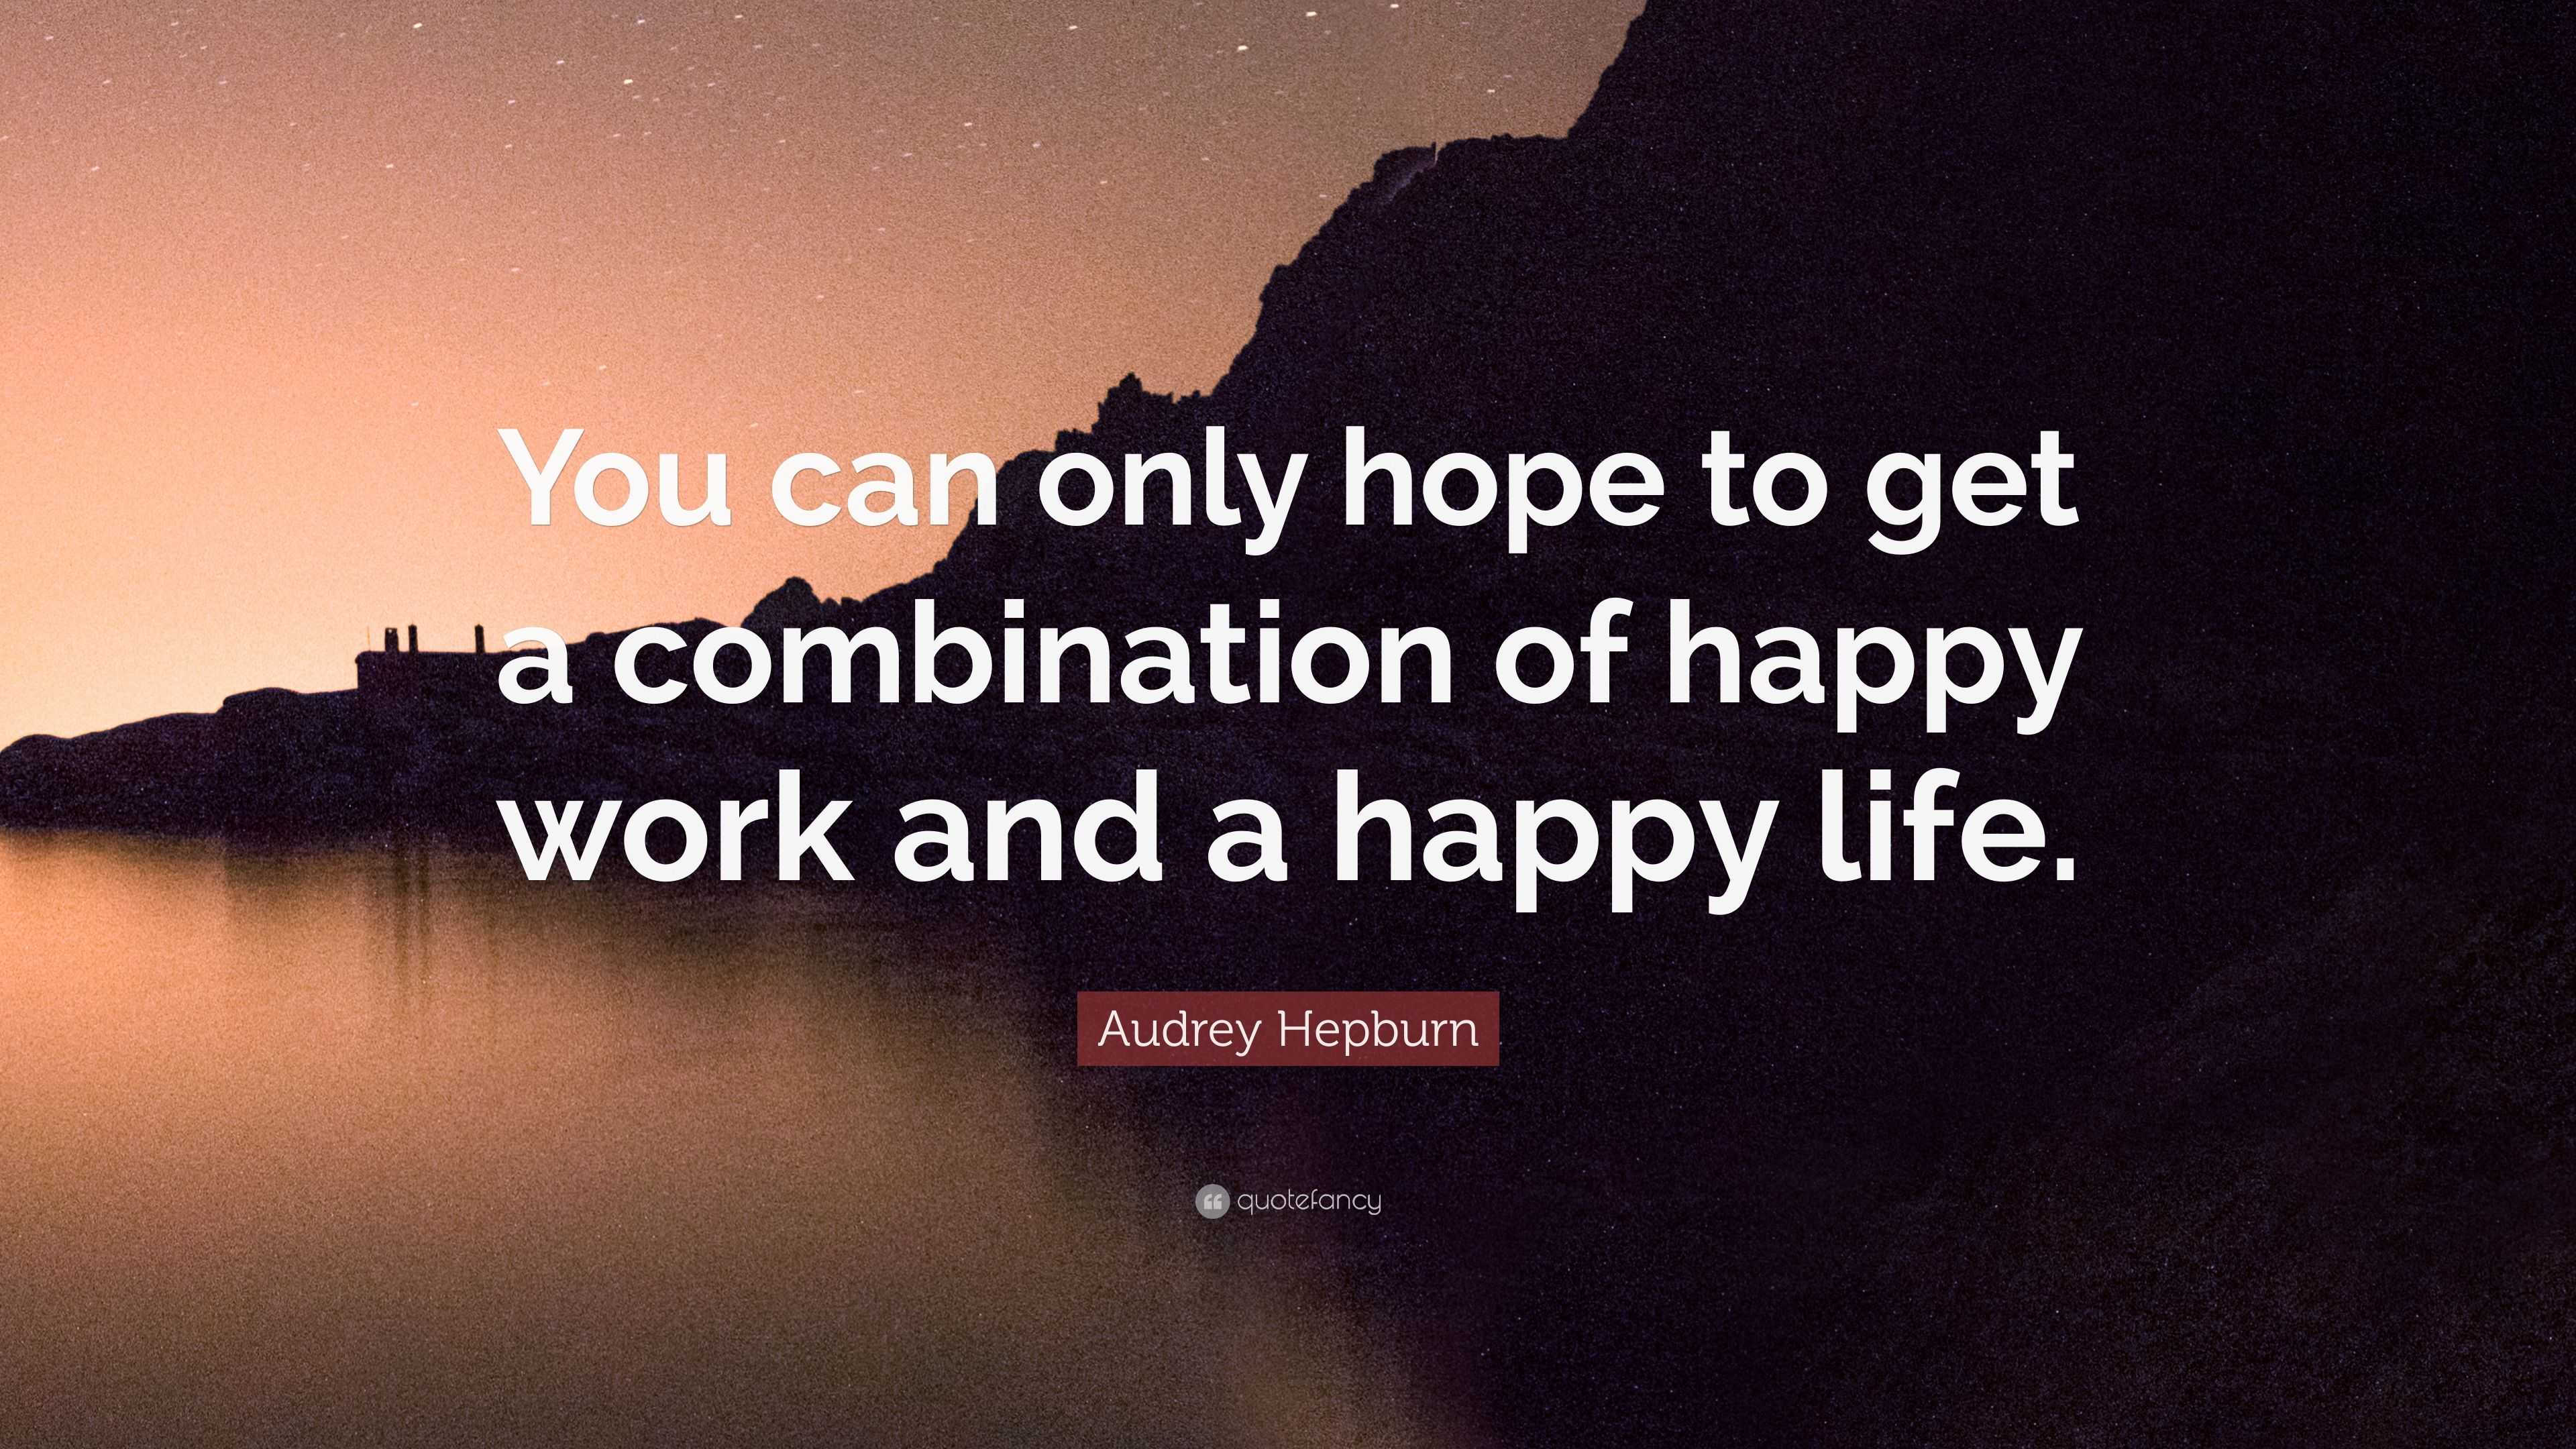 Audrey Hepburn Quote: “You can only hope to get a combination of happy ...